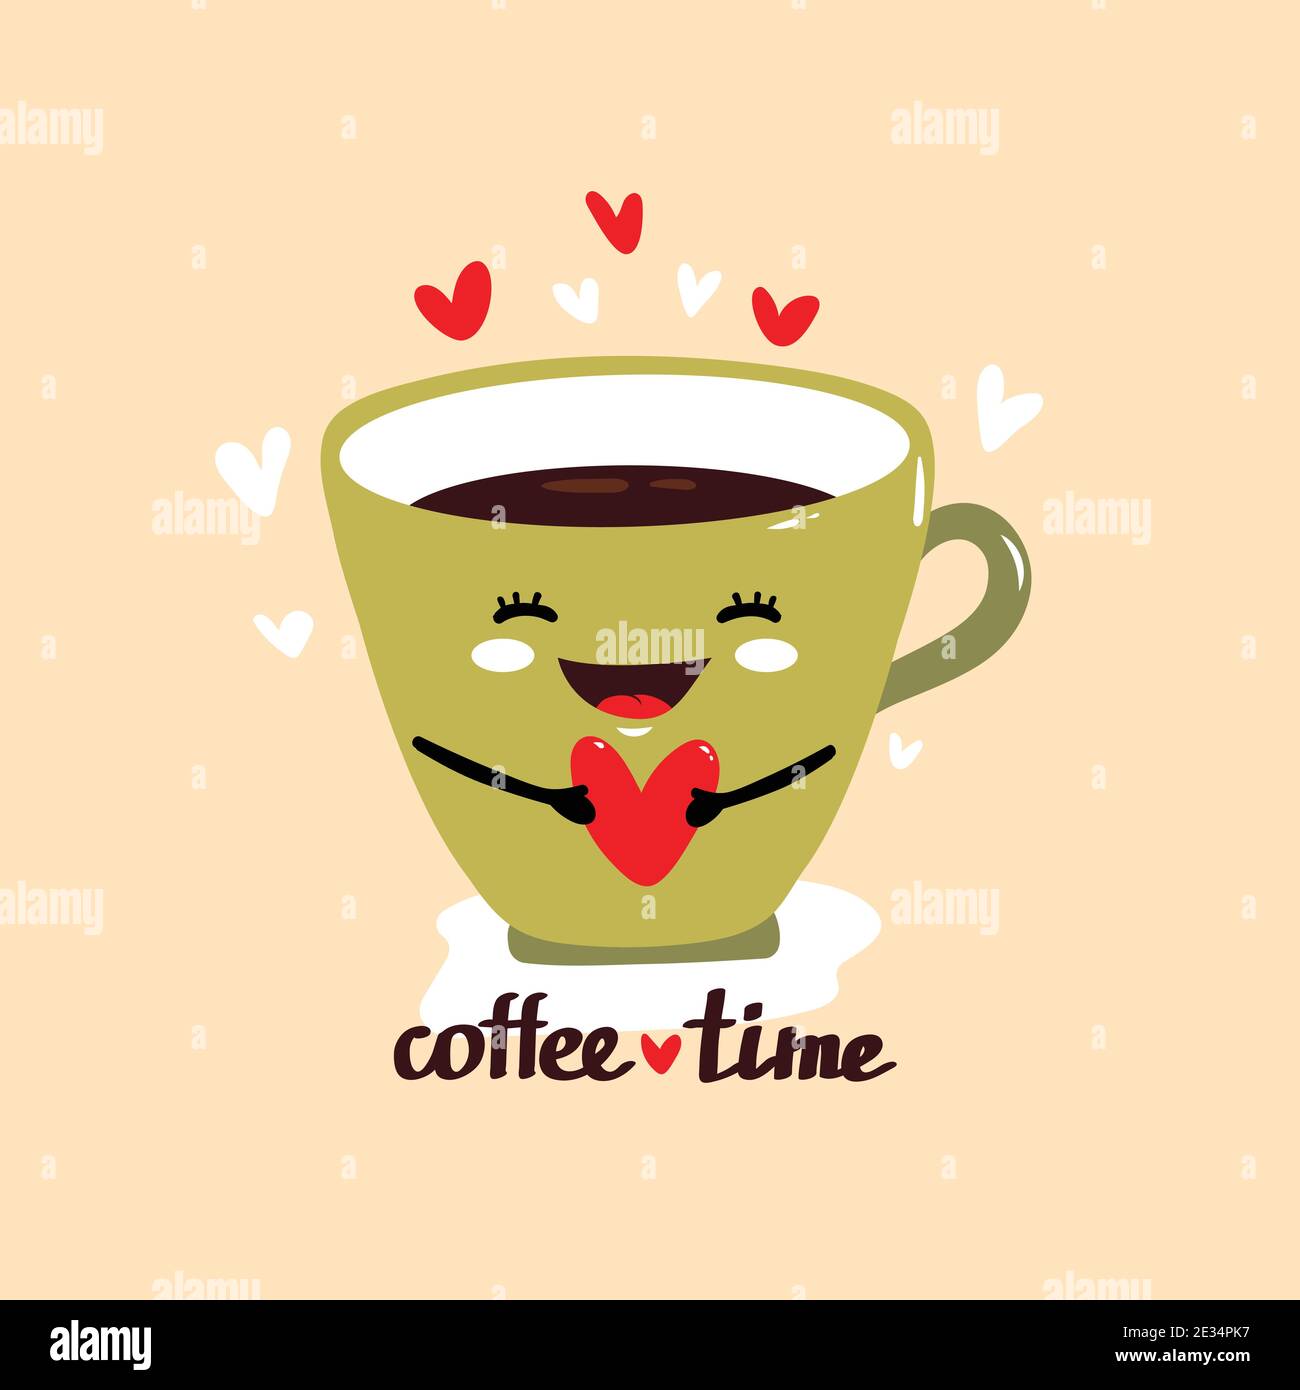 Cute vector illustration of cup of coffee holds red heart. Happy kawaii character with smiling face, hearts and text - coffee time. Card, poster, prin Stock Vector